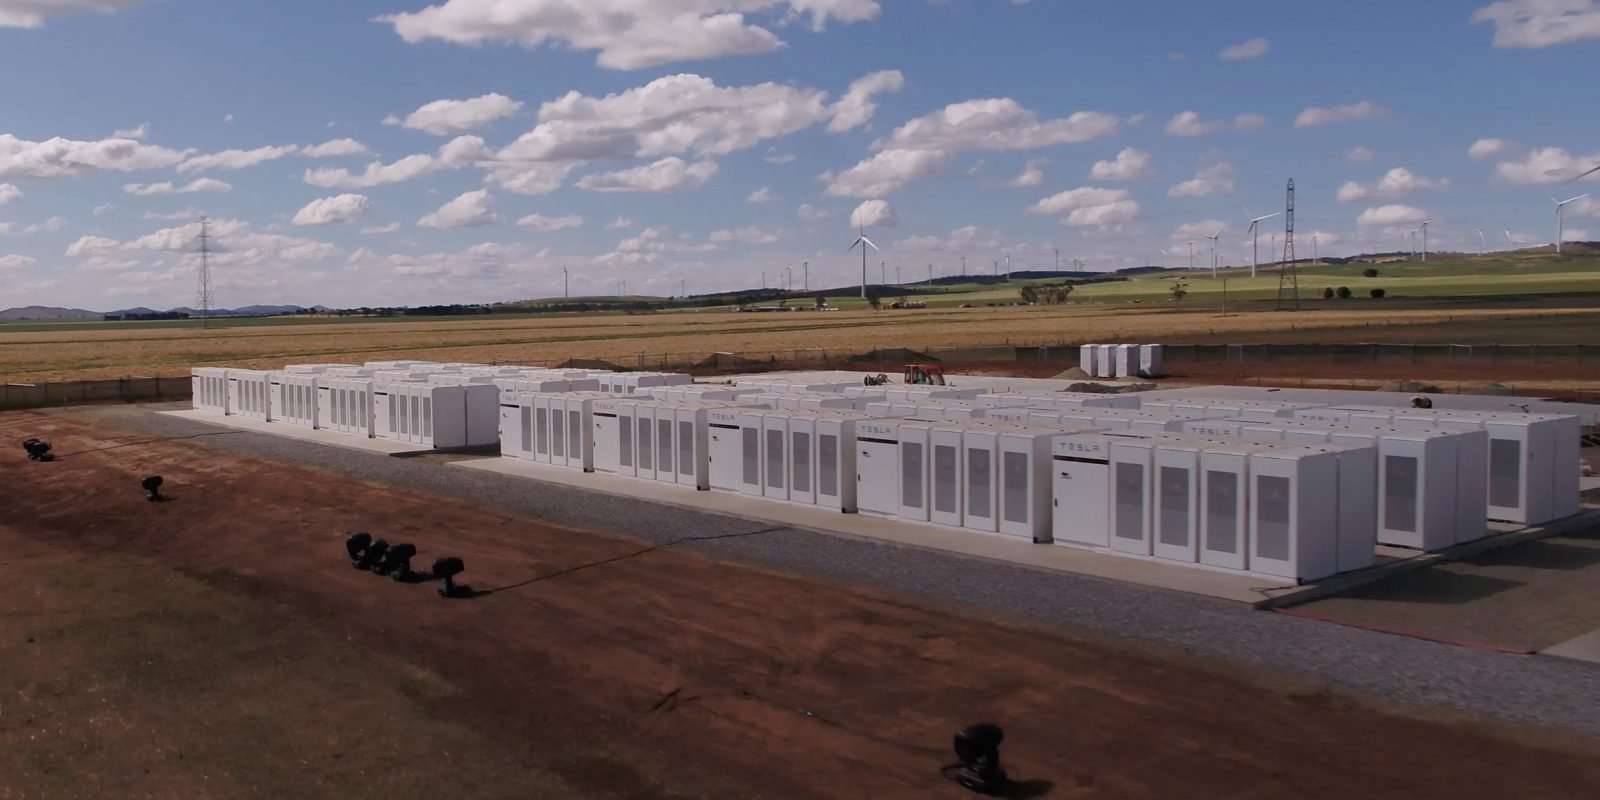 image for Tesla’s giant battery in Australia made around $1 million in just a few days